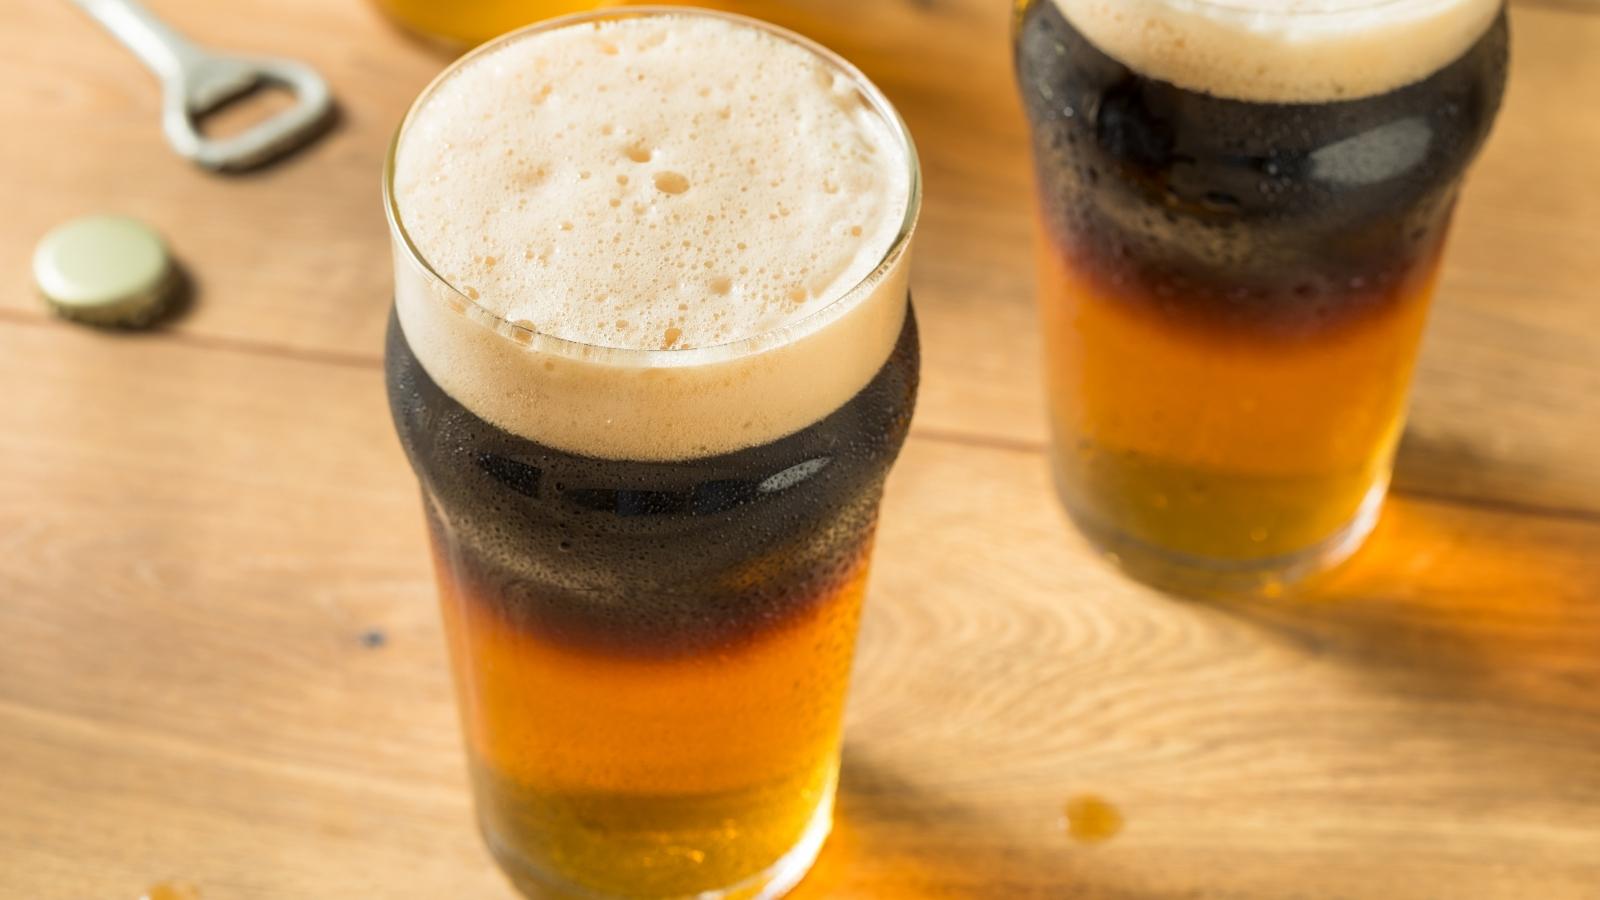 Half and Half Beer: The Quickest Recipe To Make This Drink at Home